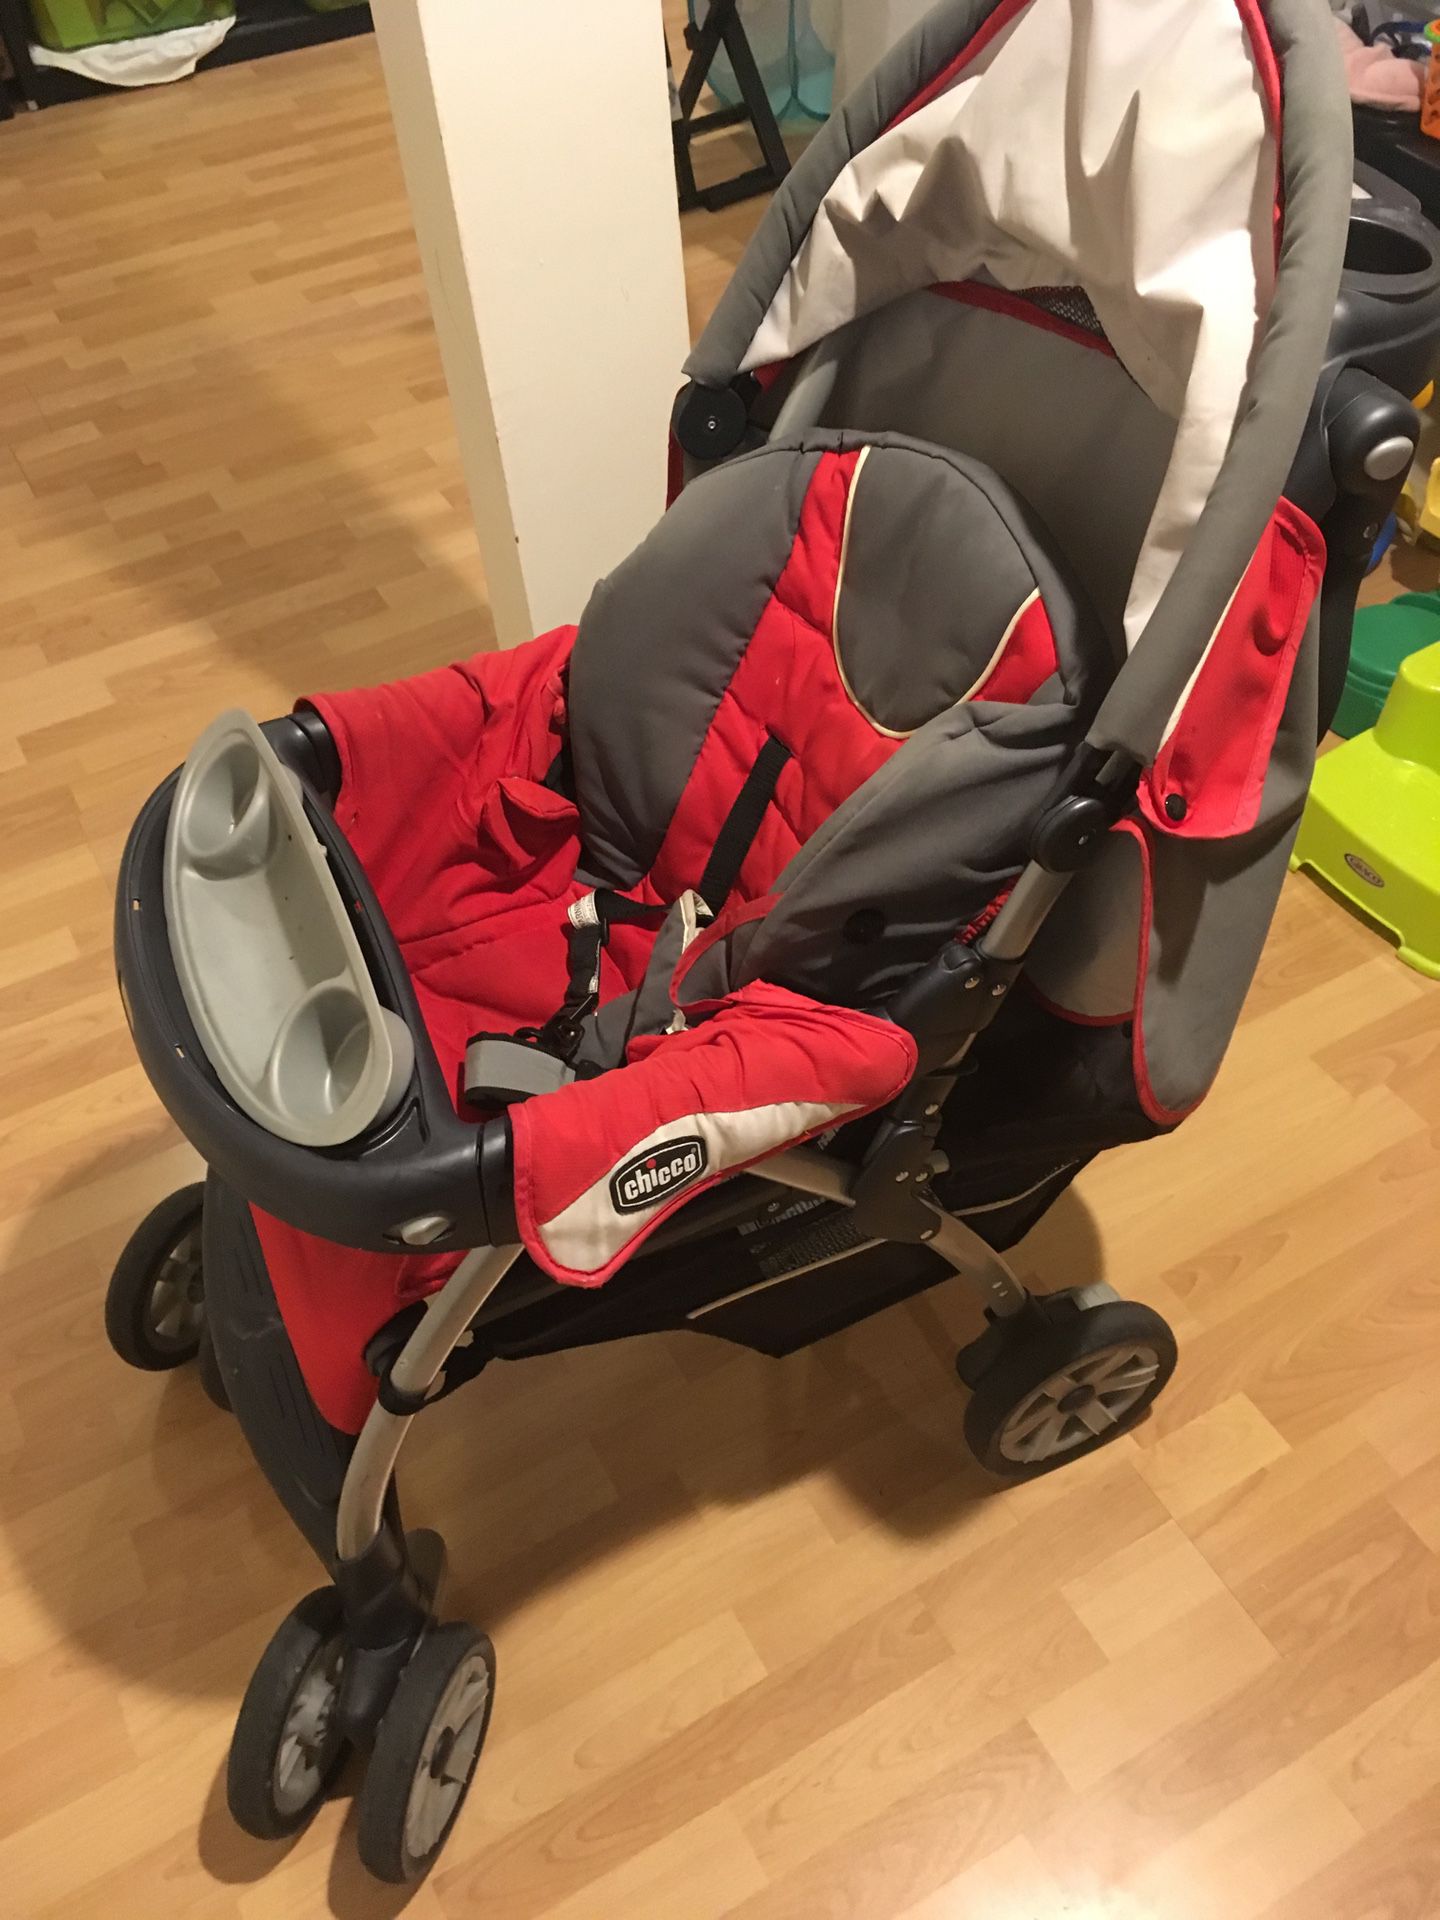 Chicco foldable stroller